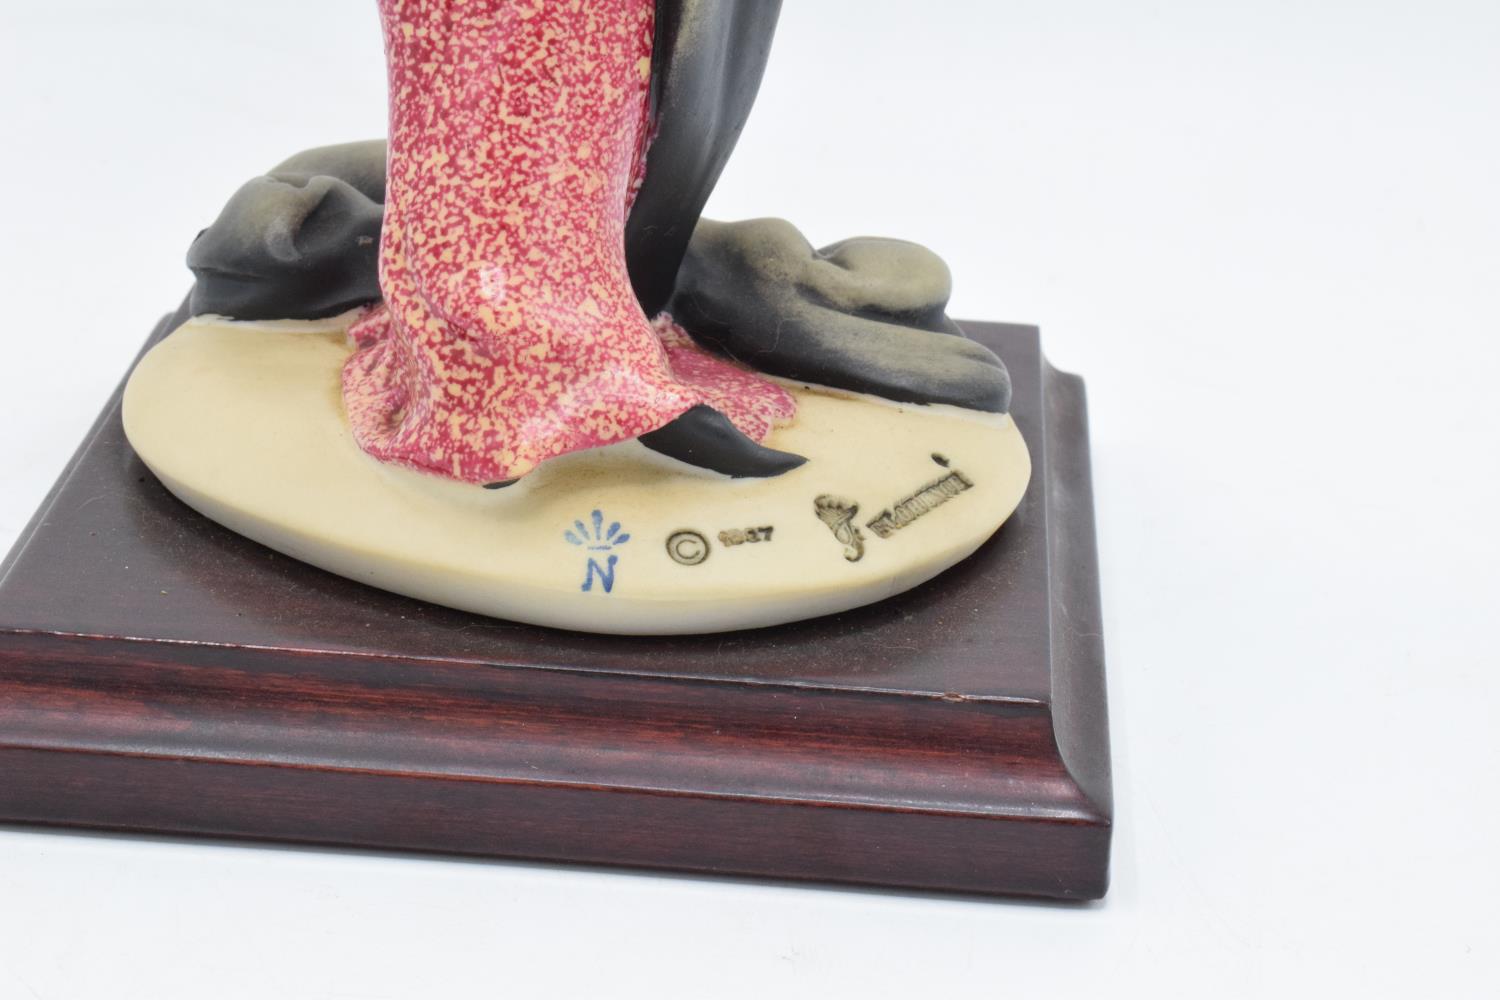 Giuseppe Armani Figurine "Lady with Compact" Mounted on Wooden Base, 1987 Limited Edition My Fair - Image 5 of 6